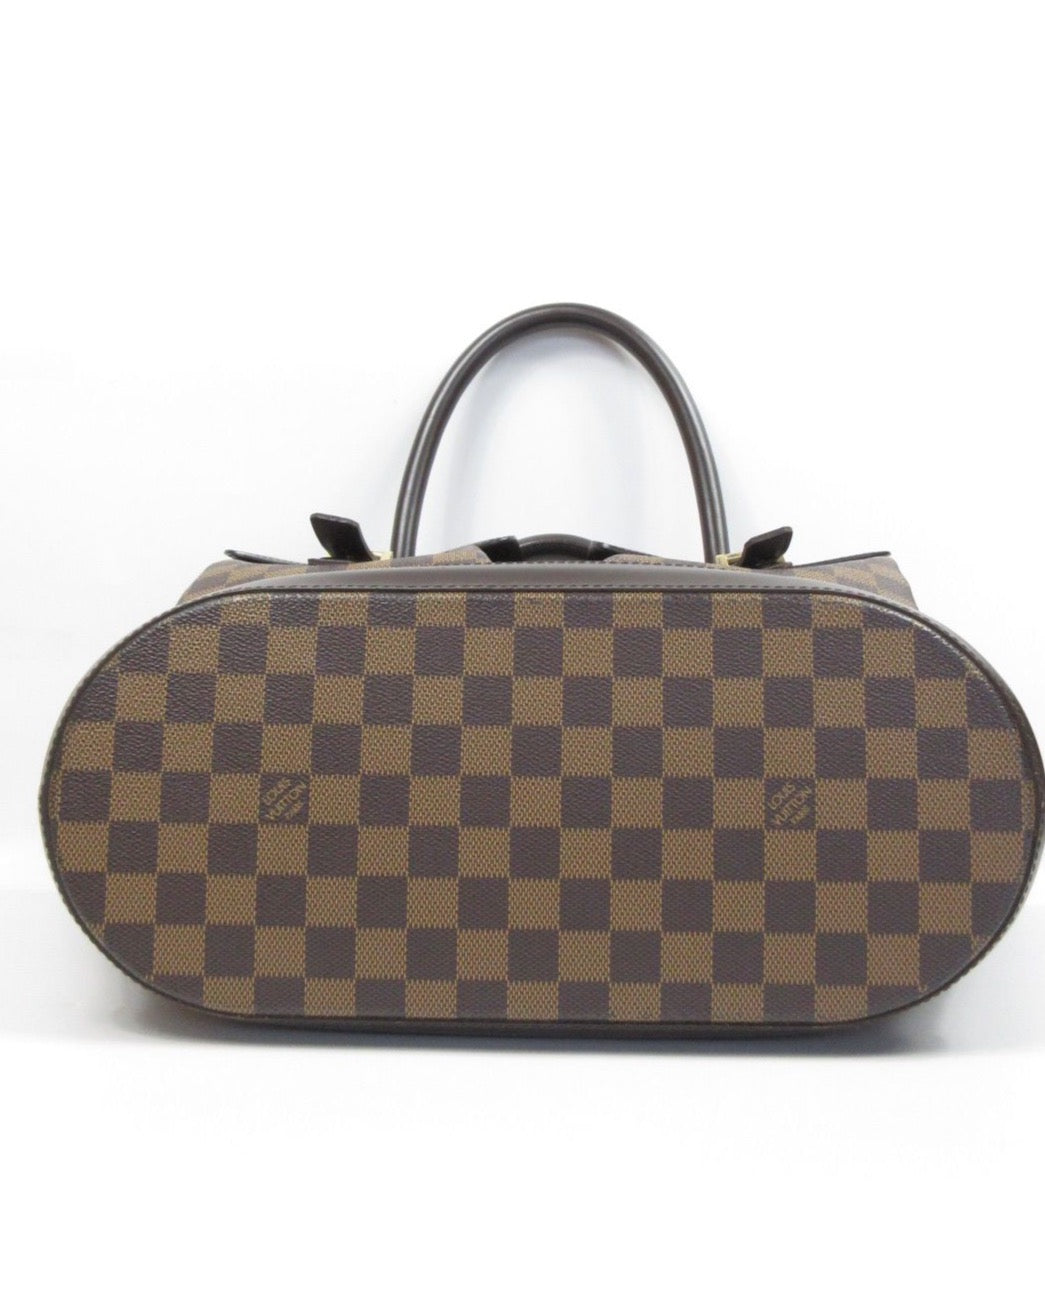 Pre Loved Louis Vuitton Manosque PM Damier Ebene Bag from UniKoncept in Waterloo